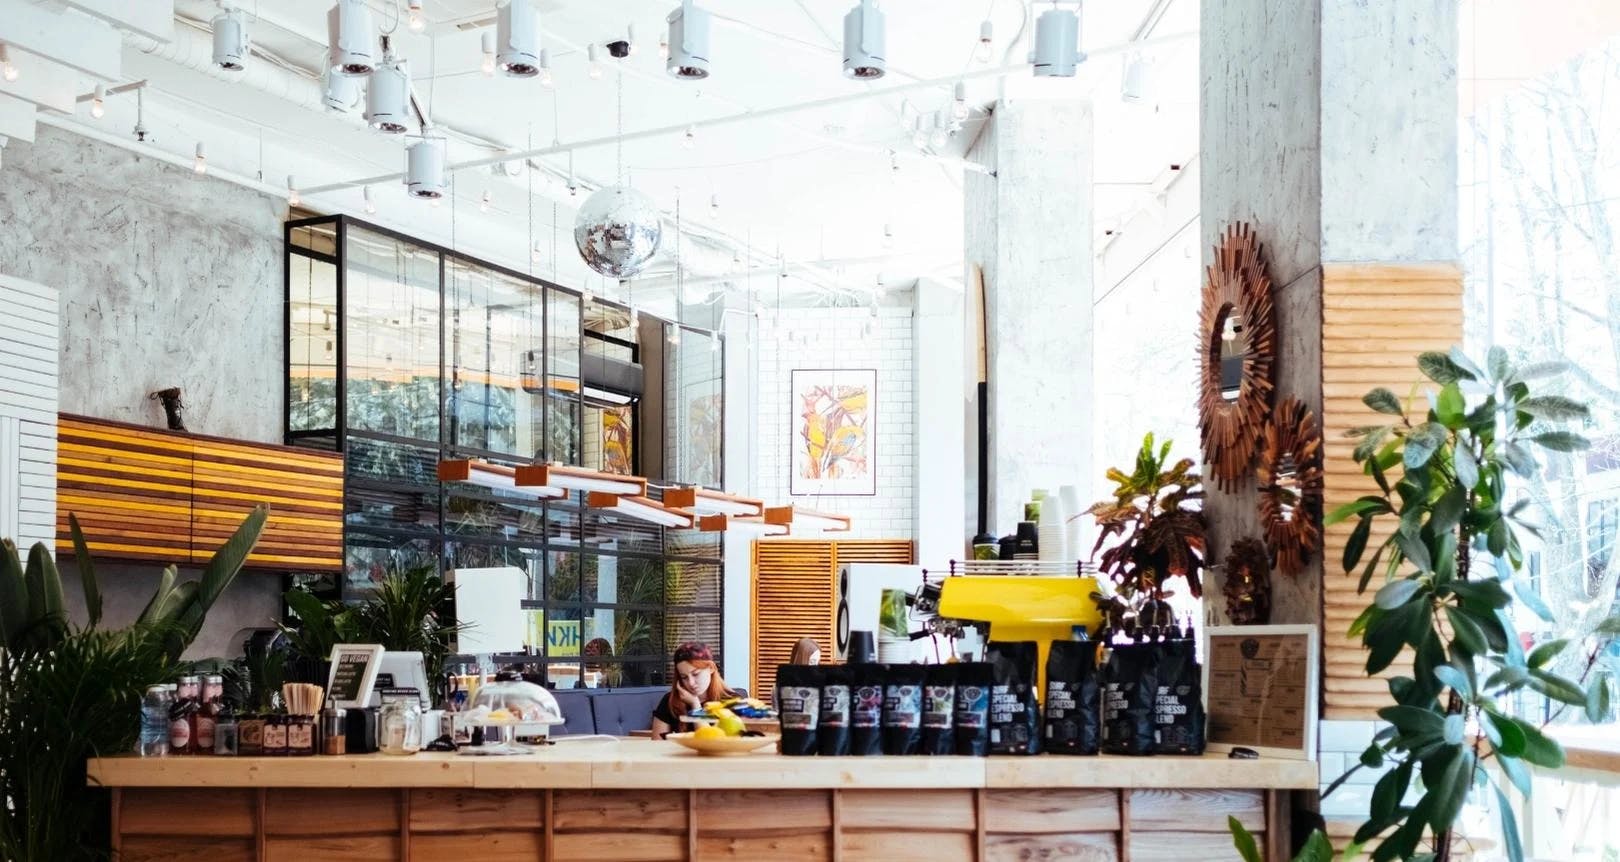  10 of the best coffee shops to work from in Cape Town